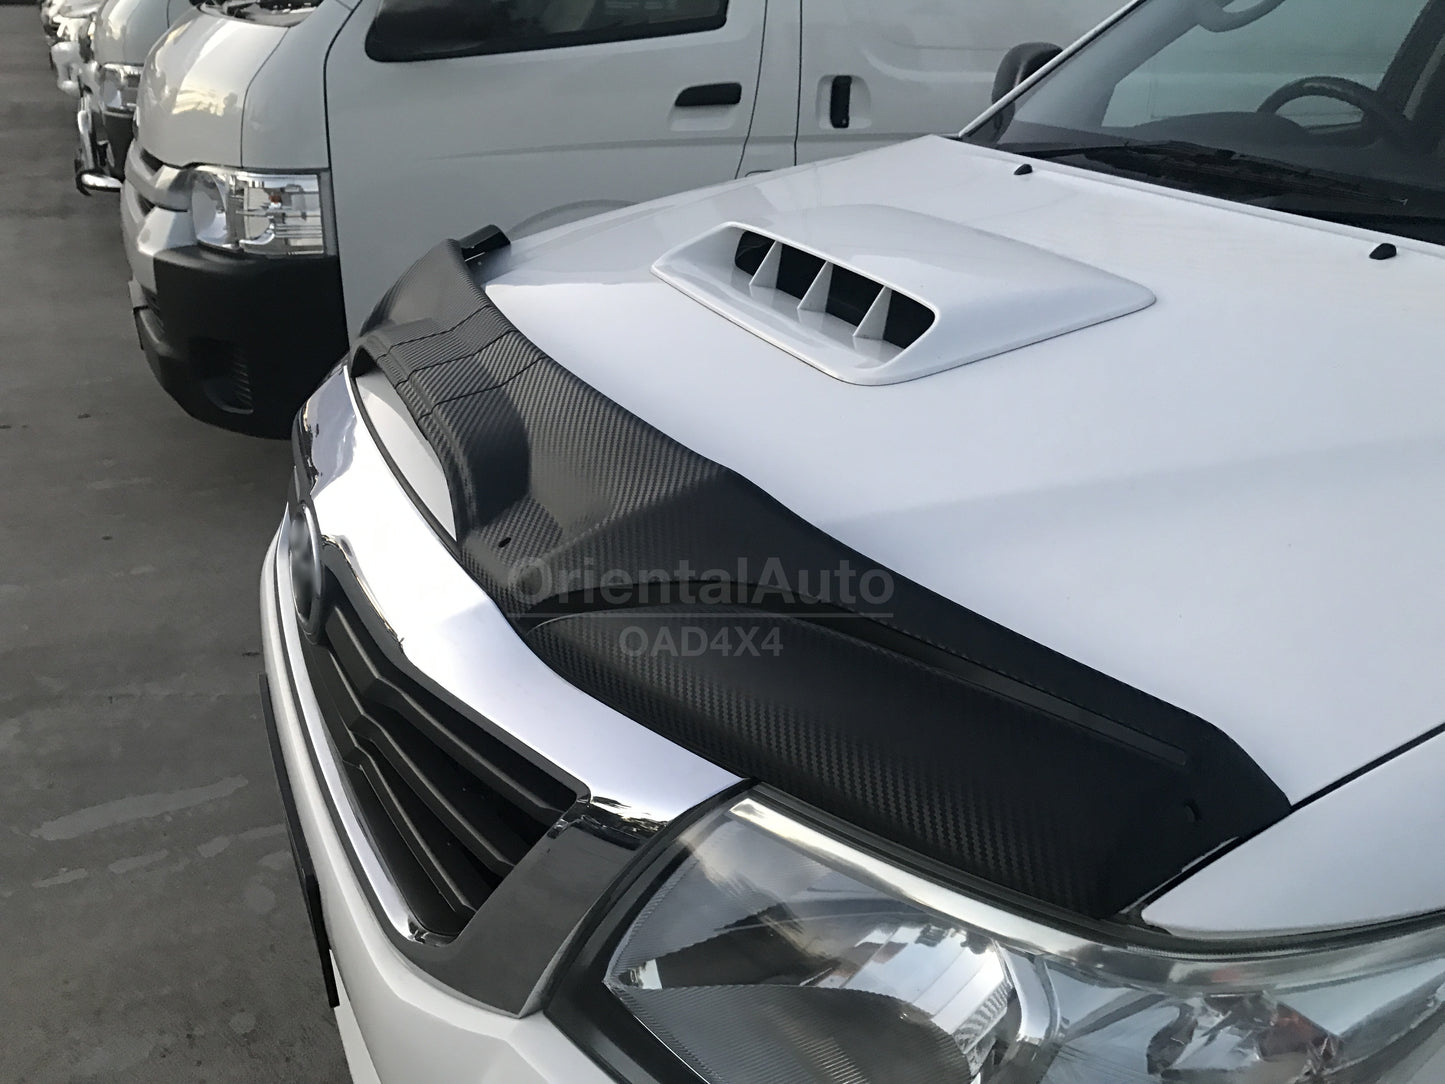 Injection Modeling Bonnet Protector & Injection Weathershield for Toyota Hilux Dual Cab 2011-2015 Weather Shields Window Visor Hood Protector Bonnet Guard